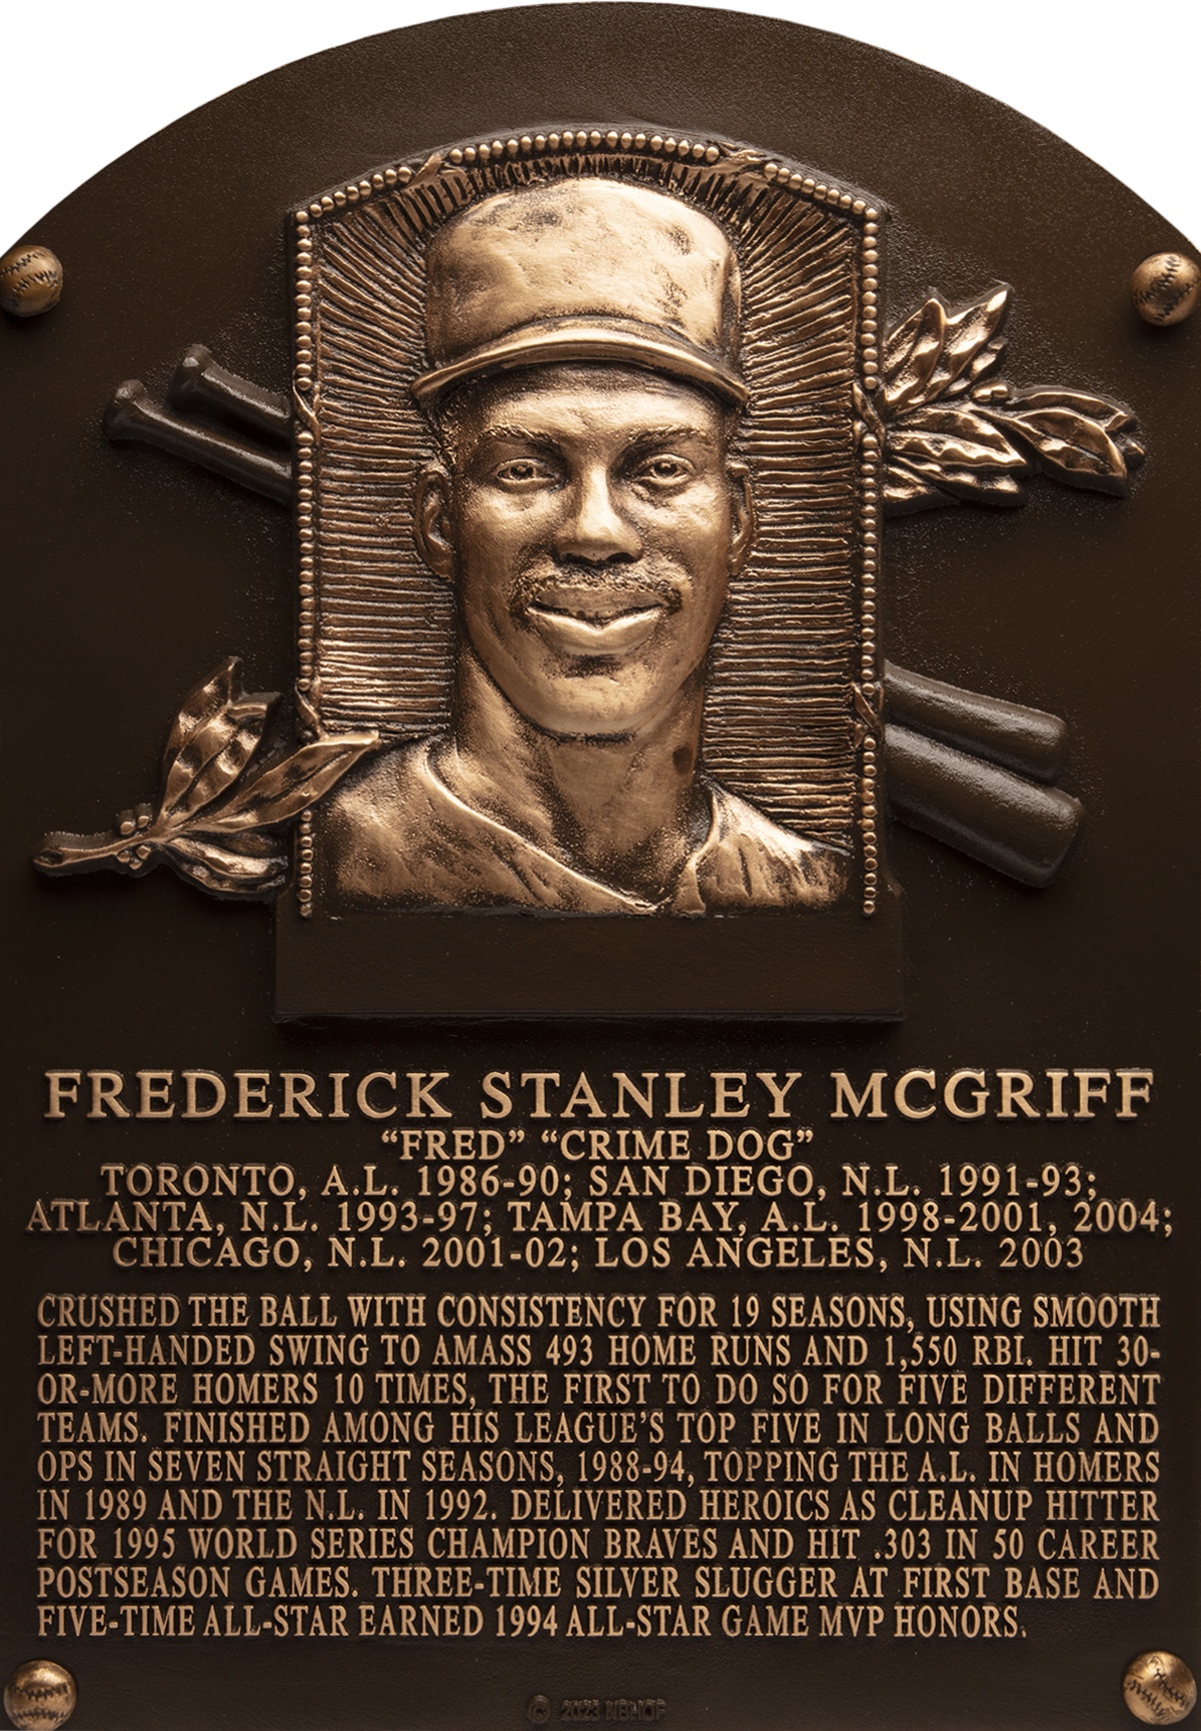 Fred McGriff Hall of Fame plaque